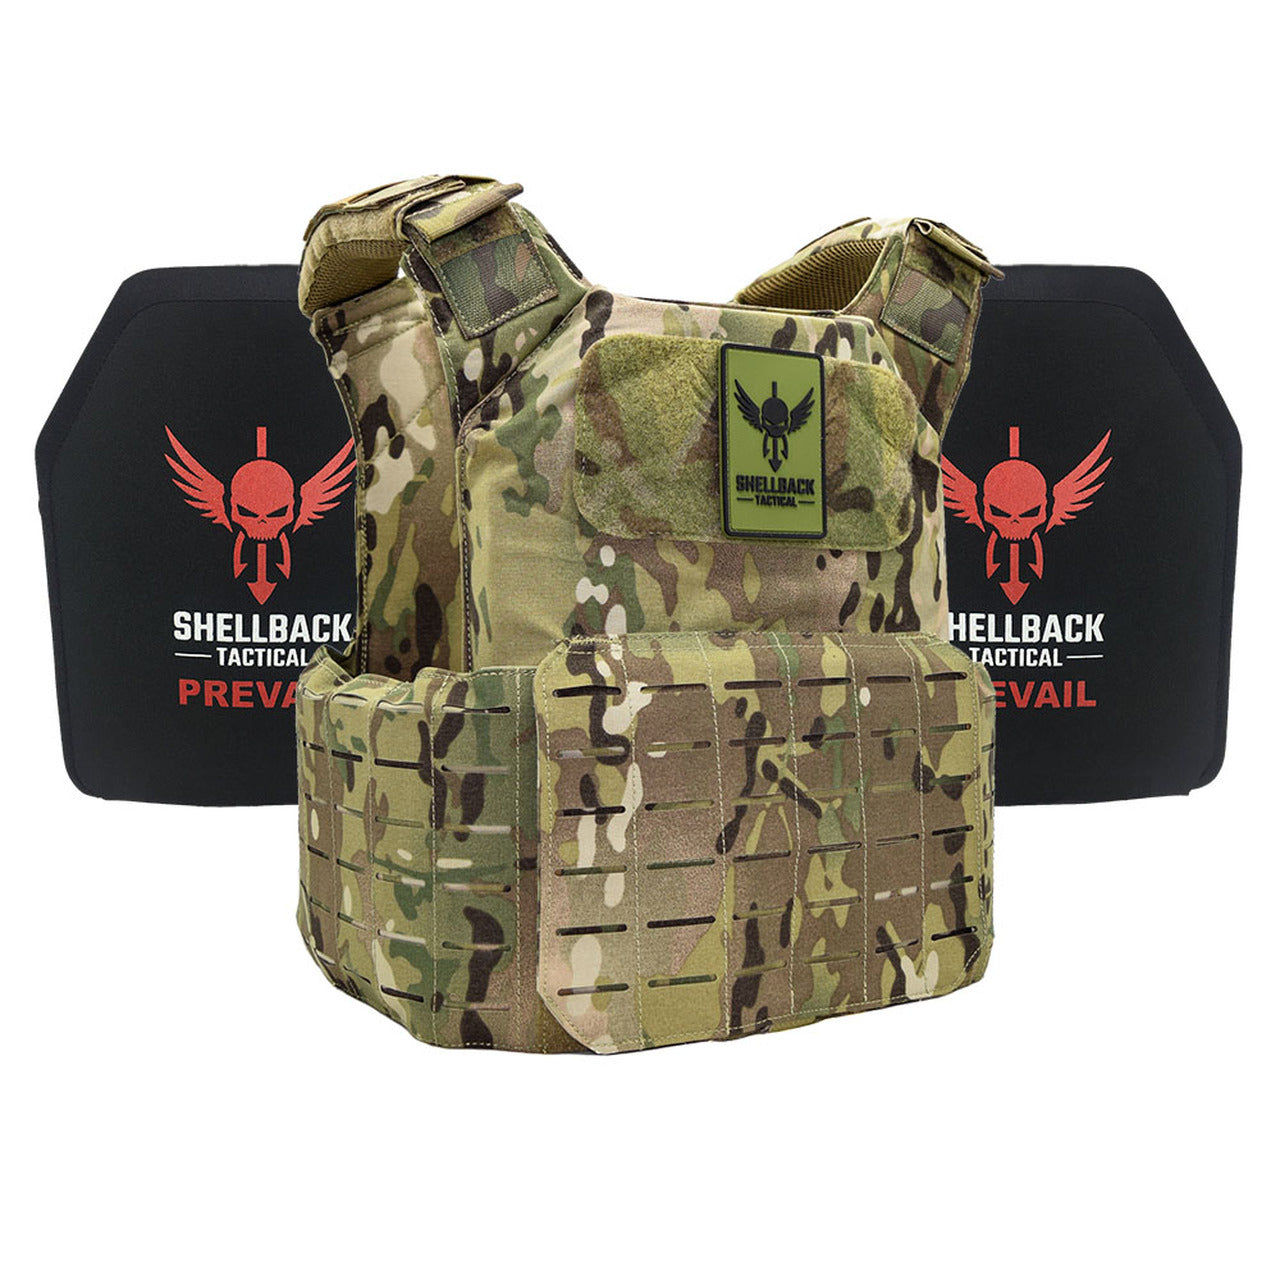 A Shellback Tactical Shield 2.0 Active Shooter Kit with Level IV 1155 Plates plate carrier with a red and black design.